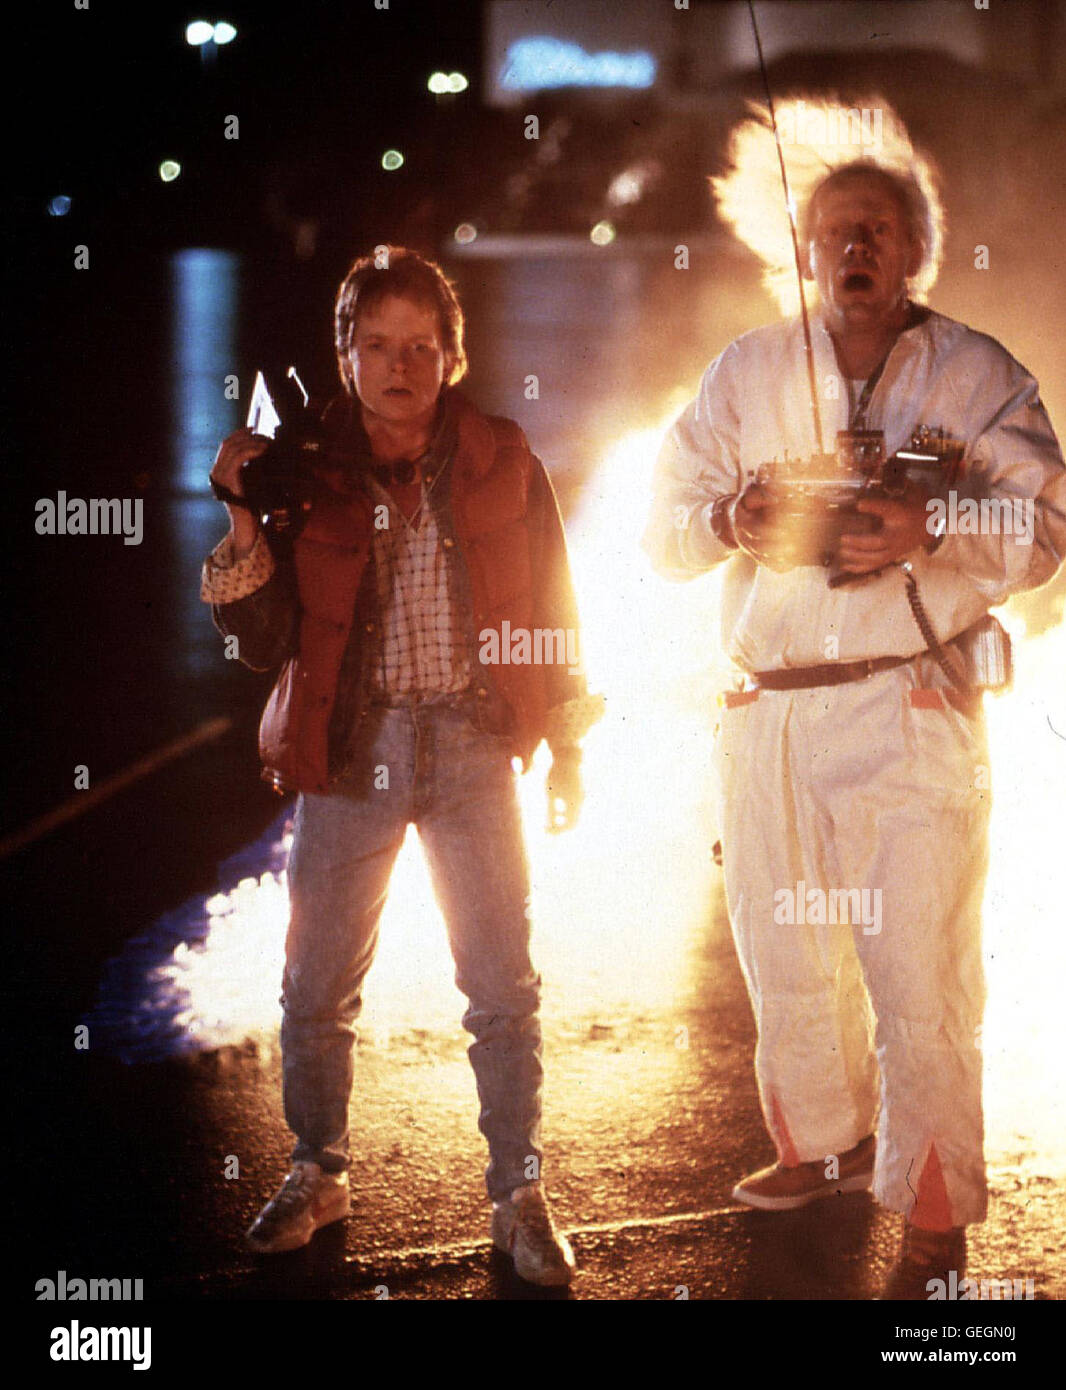 Marty Mcfly Stock Photos Marty Mcfly Stock Images Alamy Images, Photos, Reviews